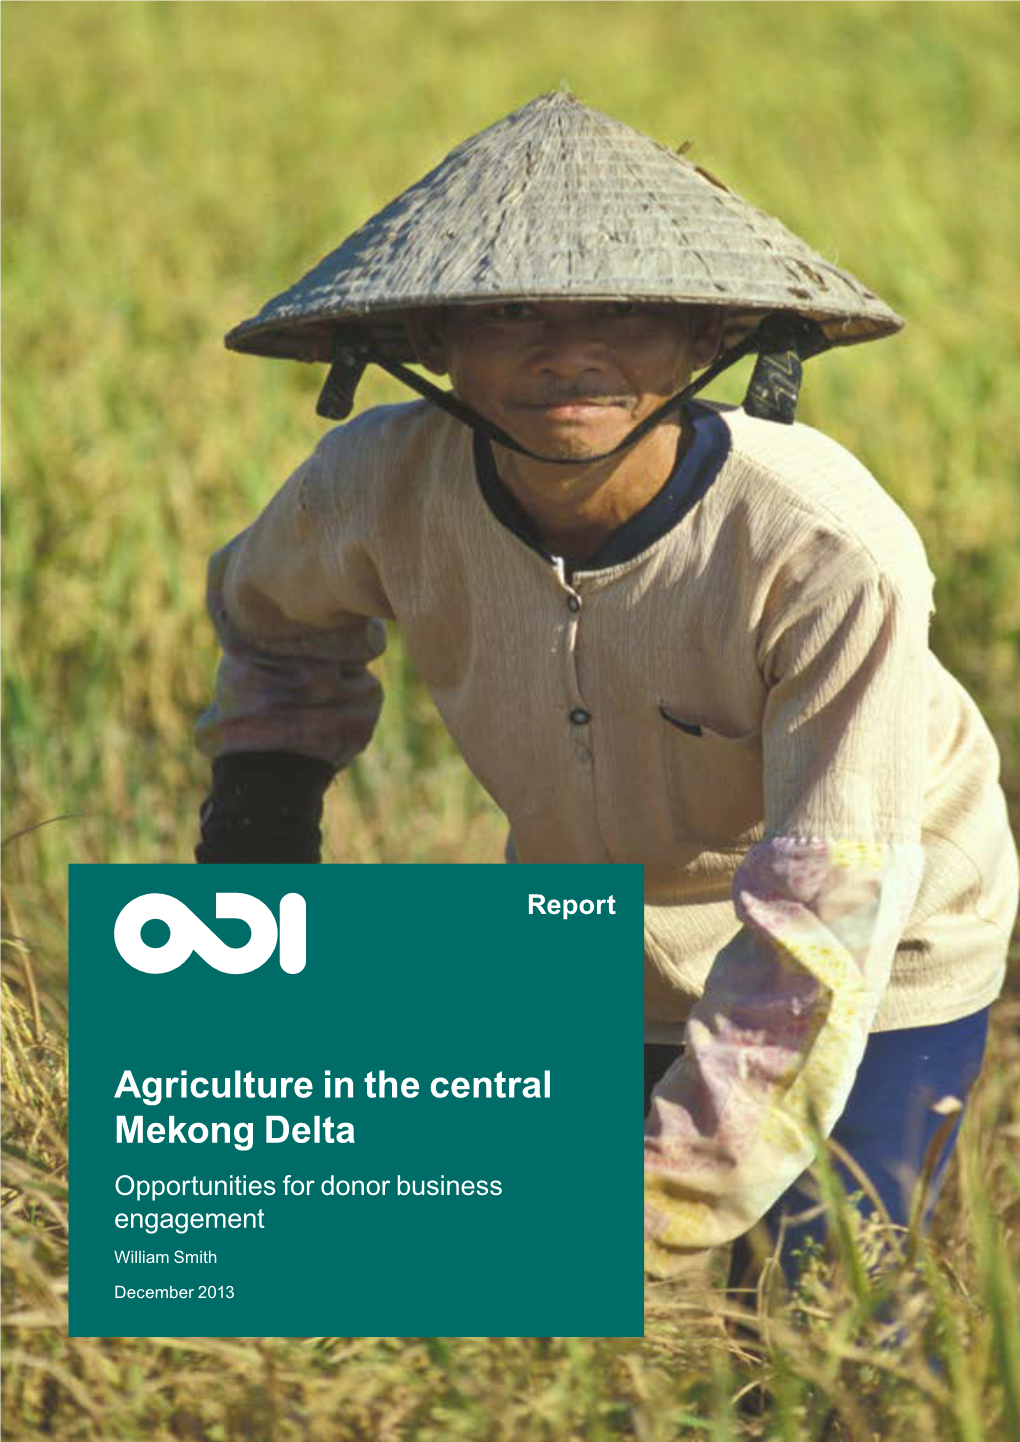 Agriculture in the Central Mekong Delta Opportunities for Donor Business Engagement William Smith